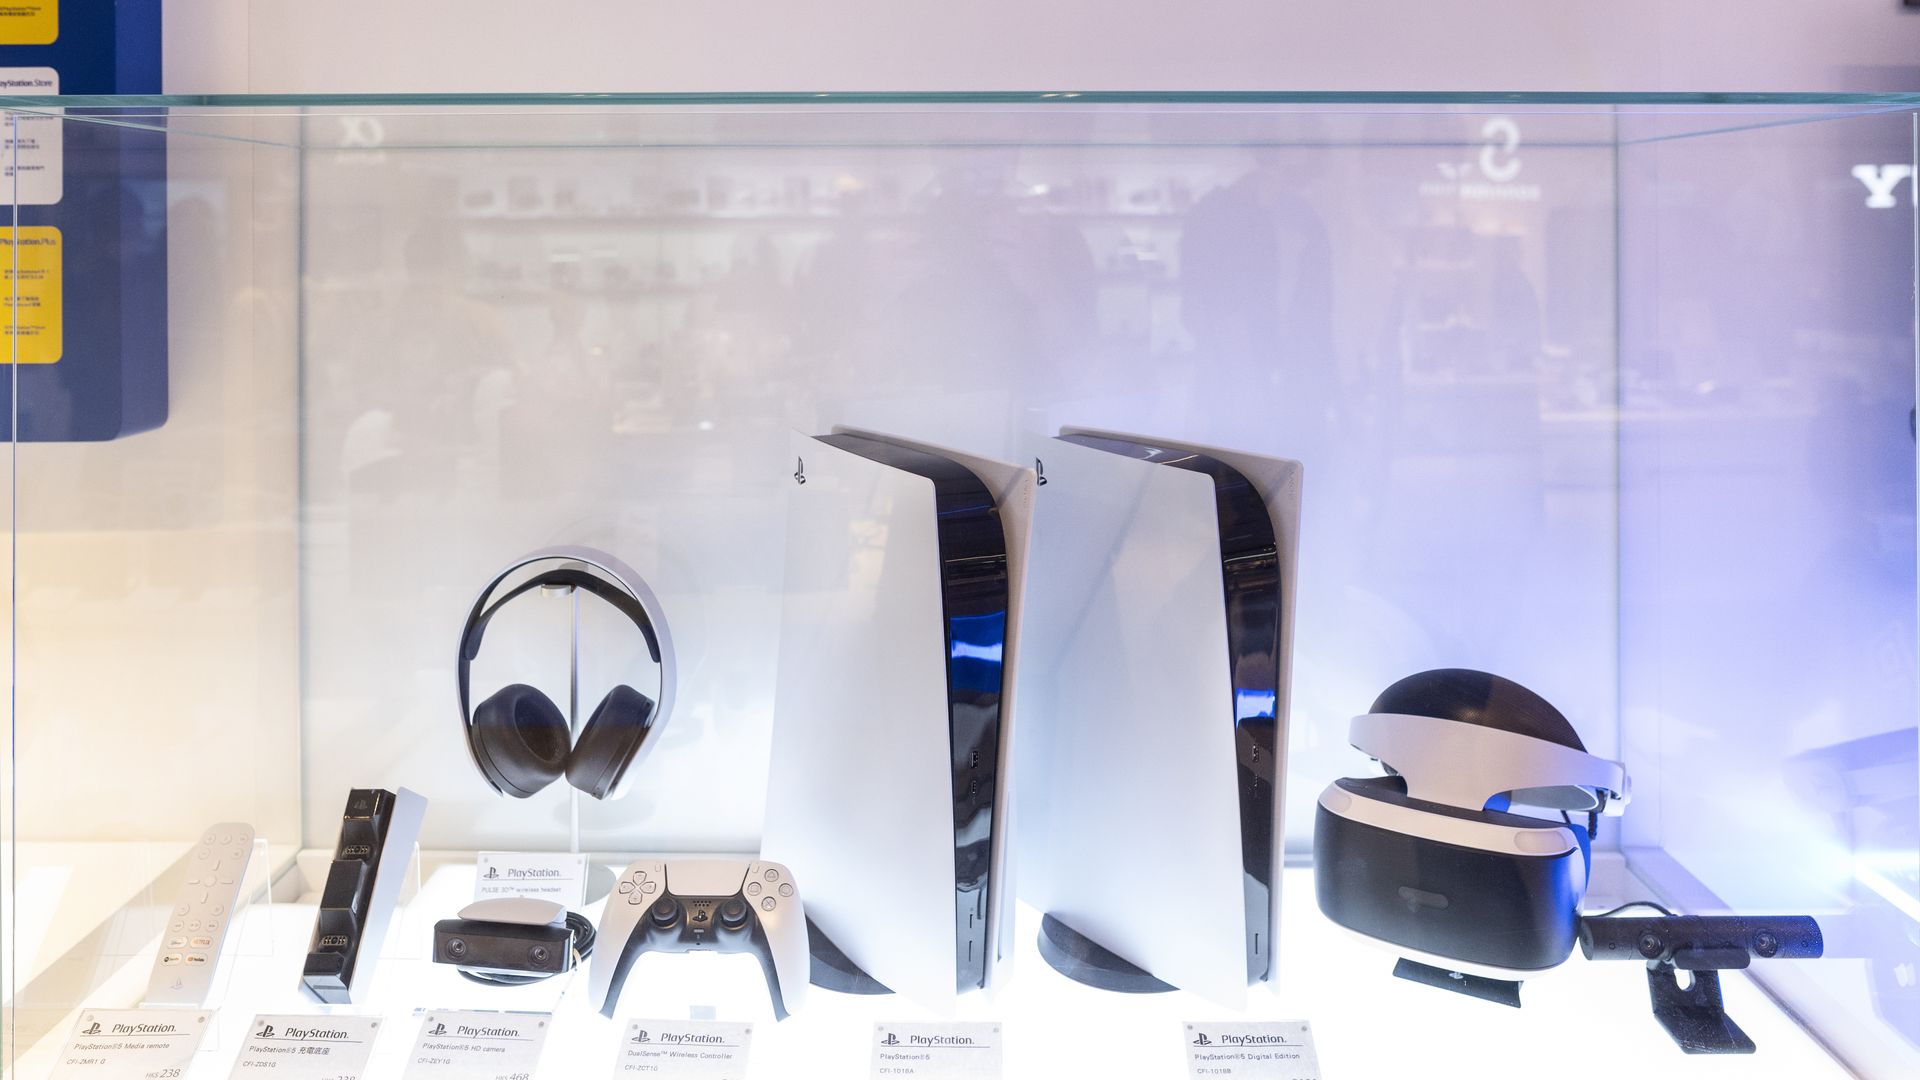 PlayStation 5 hardware, controller and other peripherals in a display case.